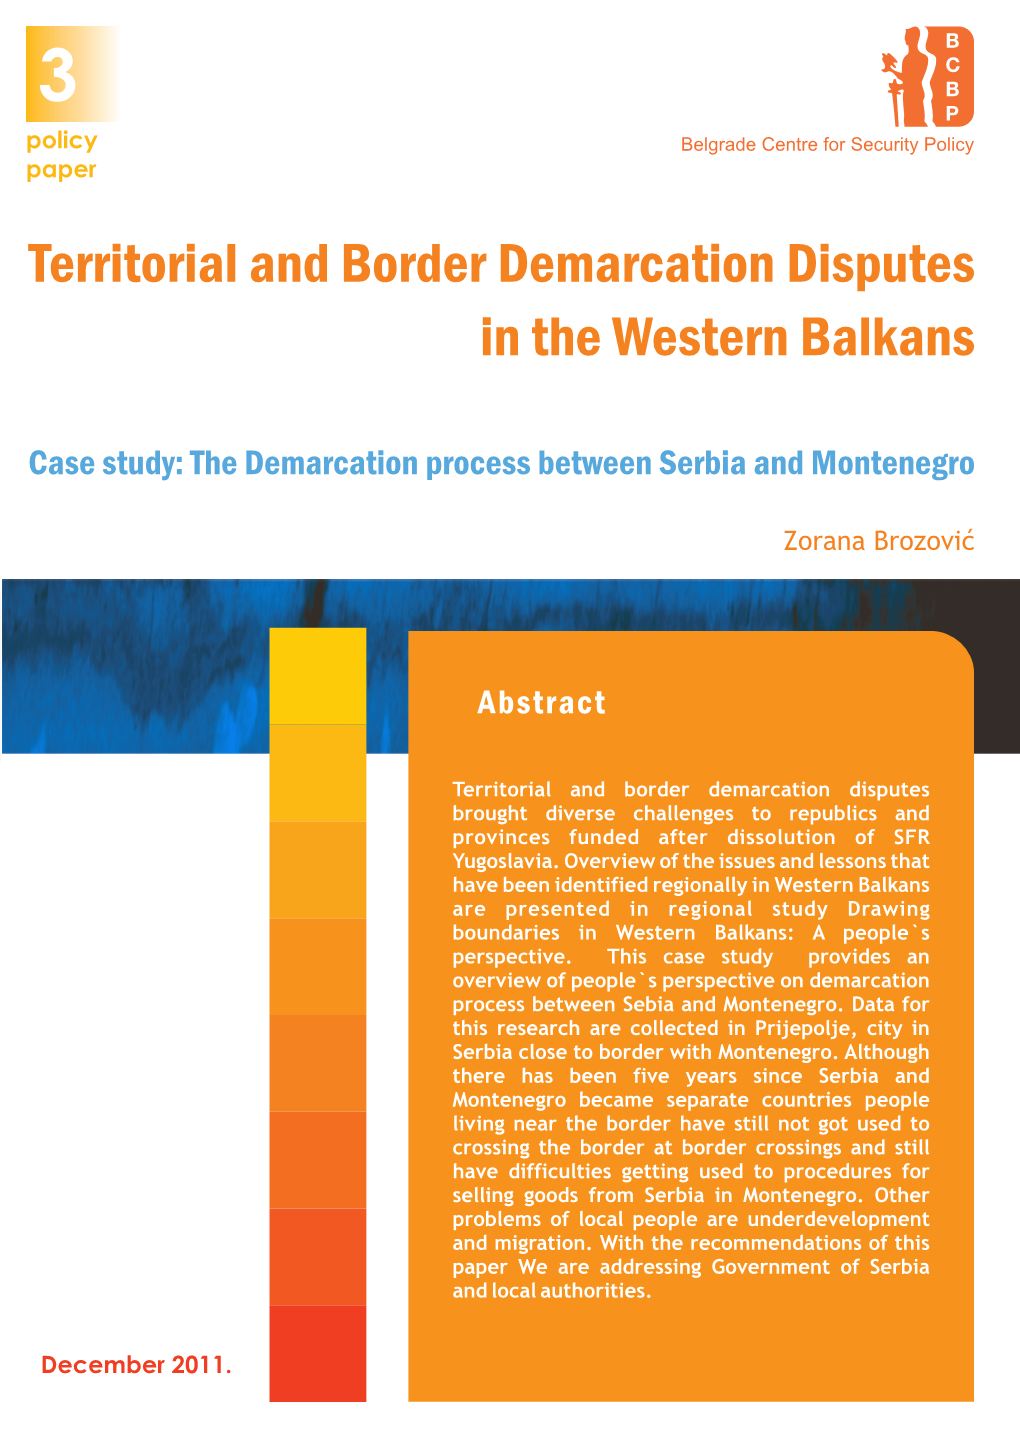 Territorial and Border Demarcation Disputes in the Western Balkans